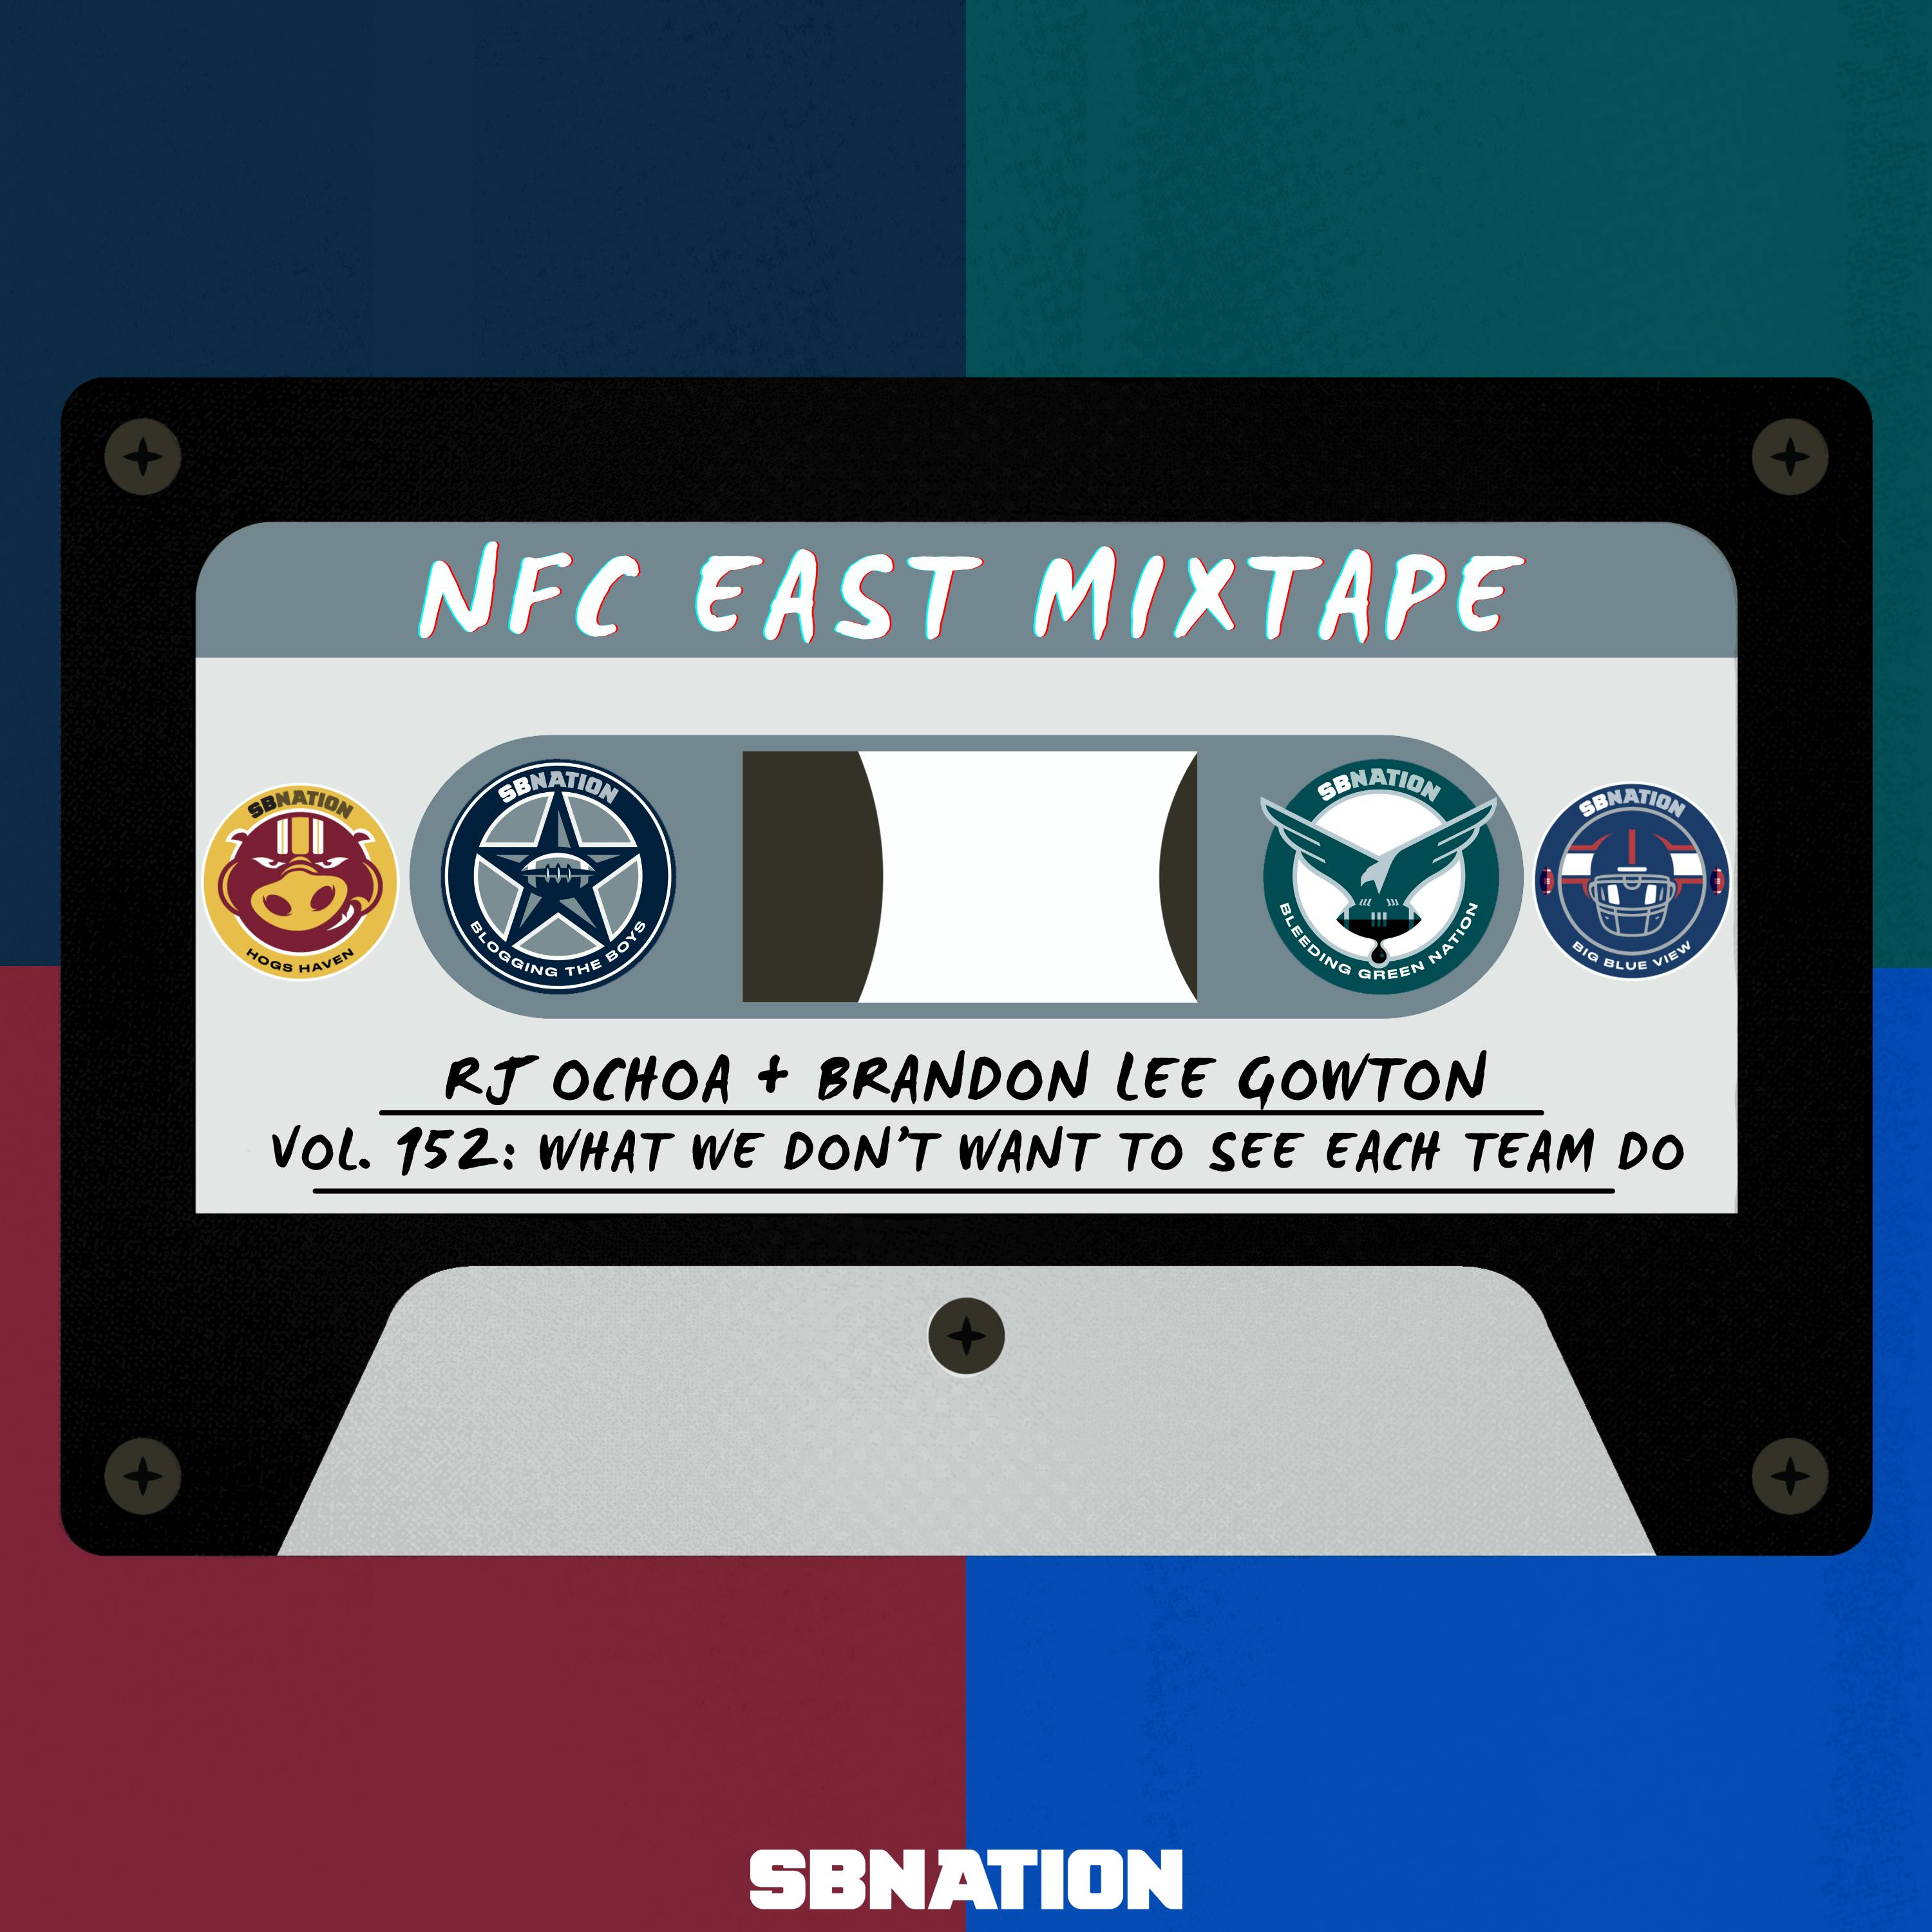 NFC East Mixtape Vol. 152: What we don’t want to see each team do